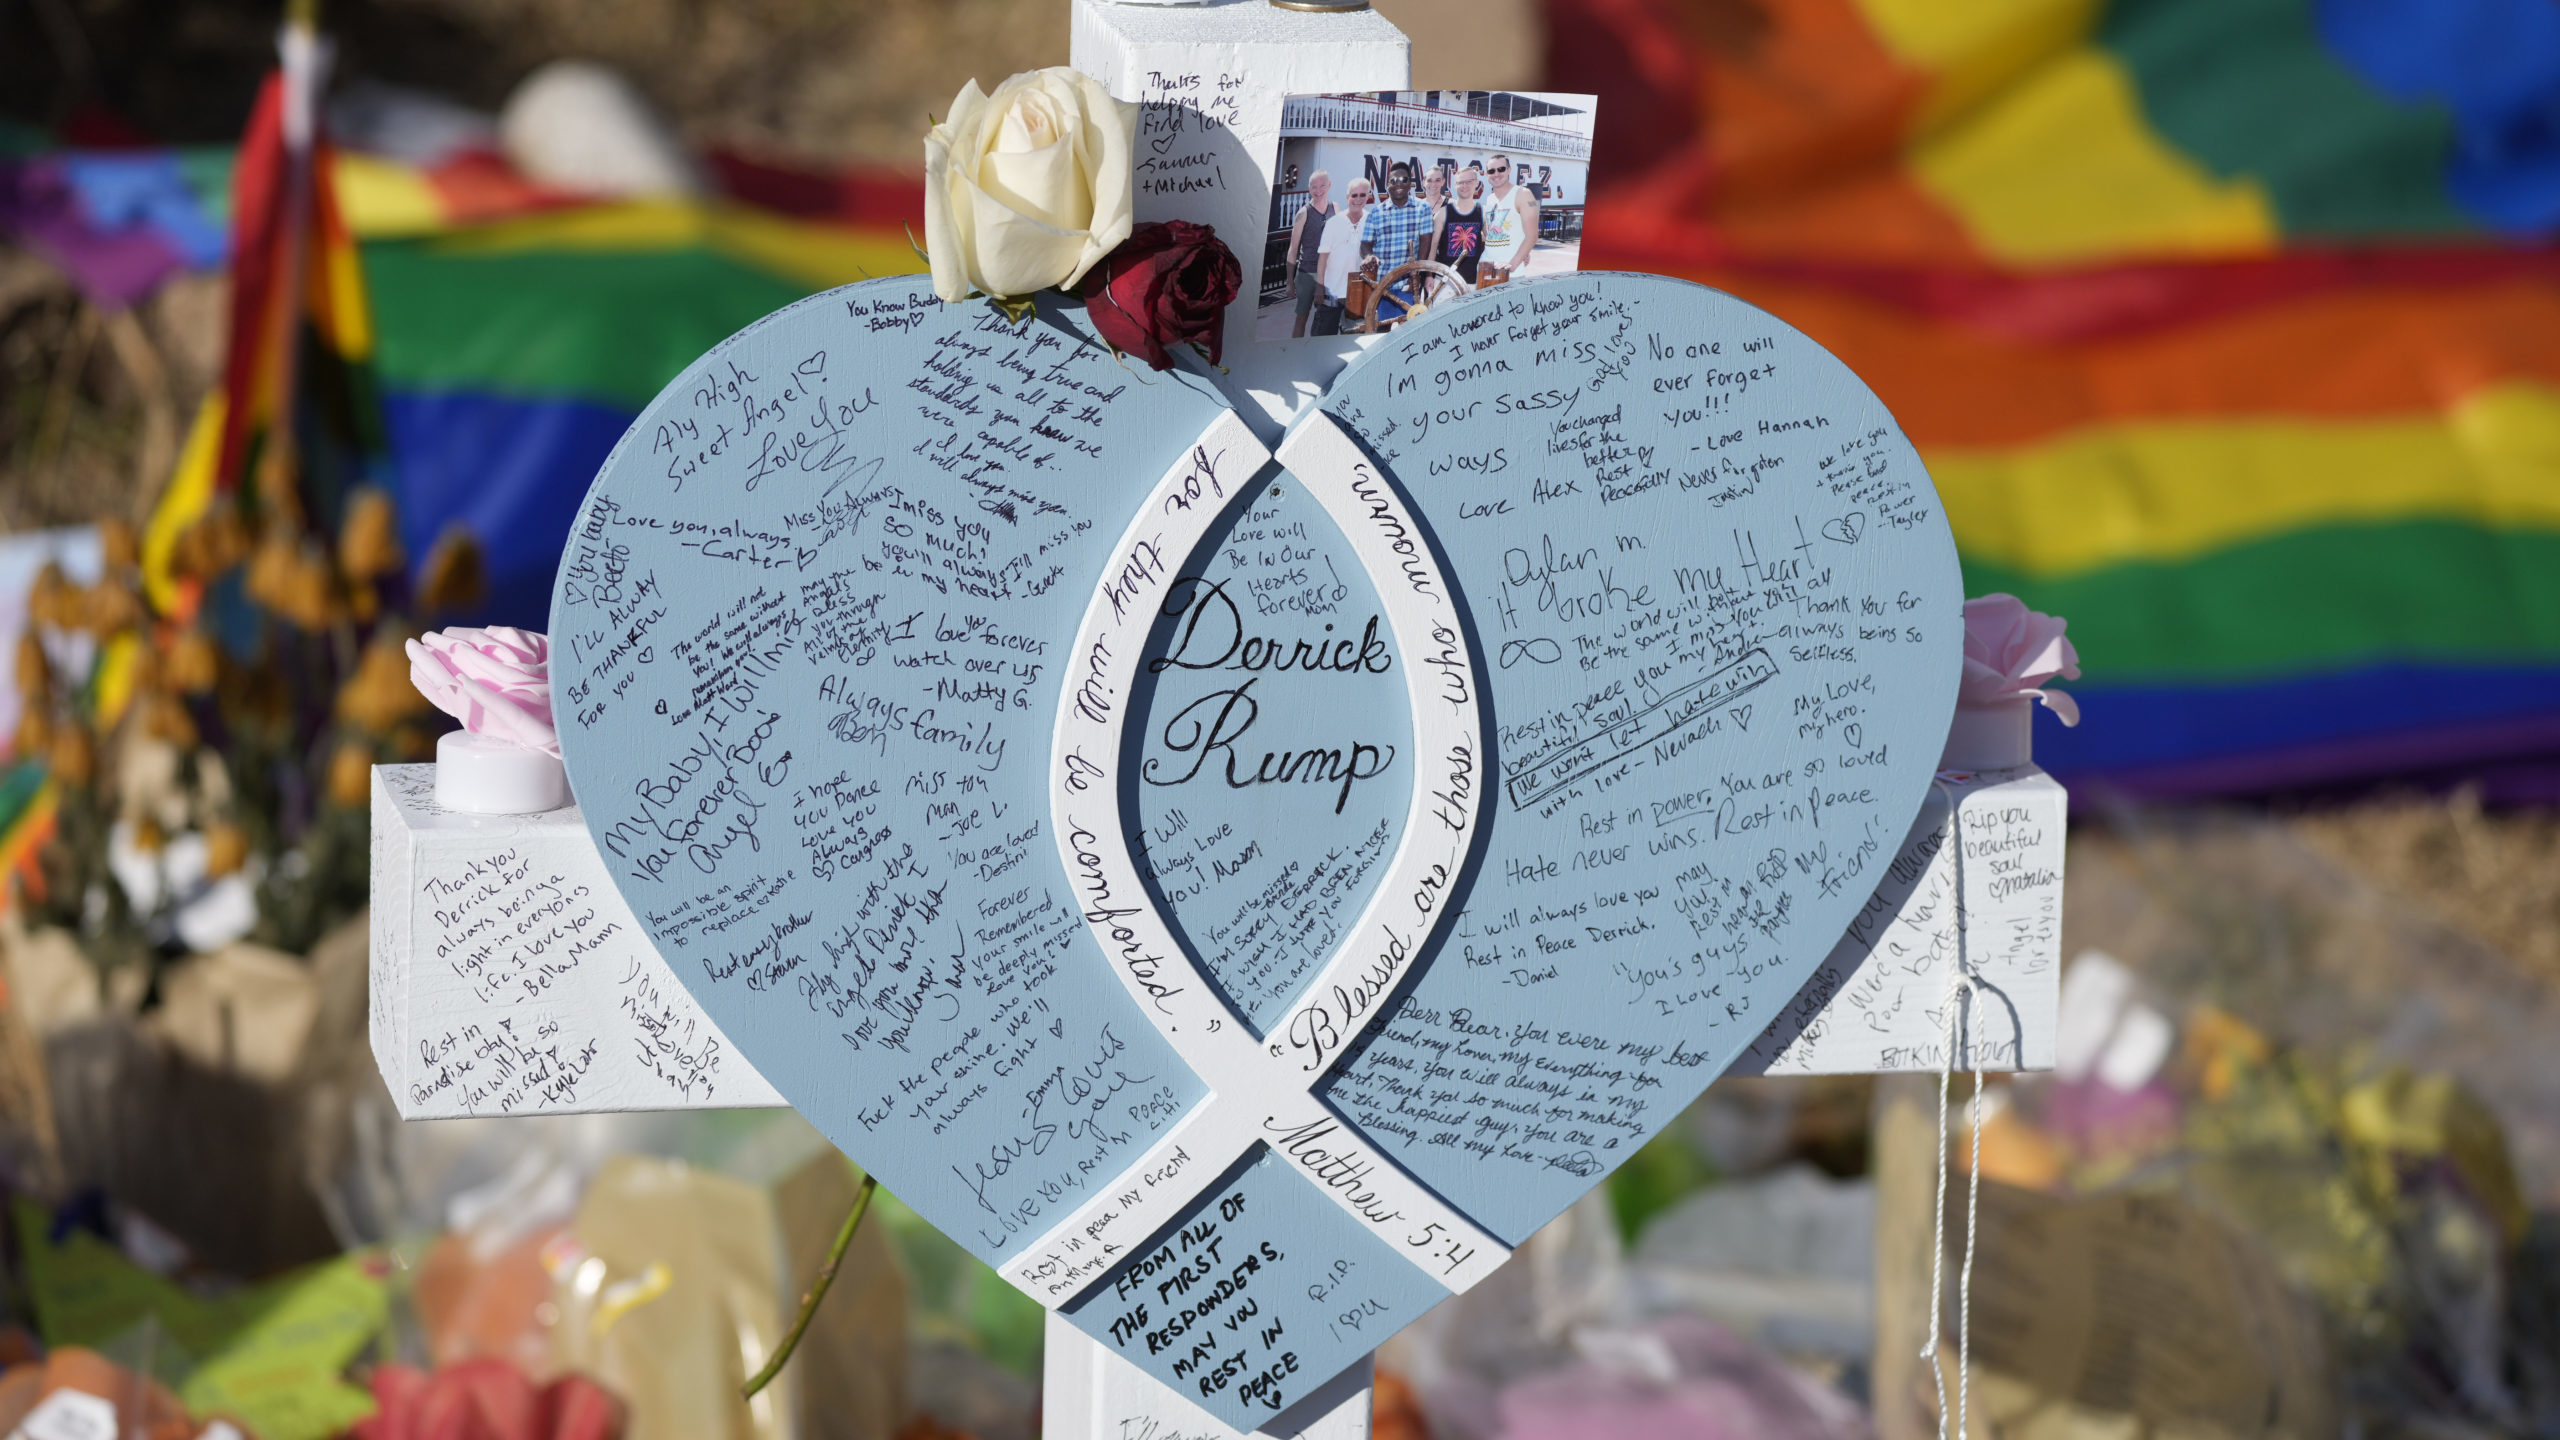 Hand-written messages cover the heart attached to the cross to honor a victim of the mass shooting ...